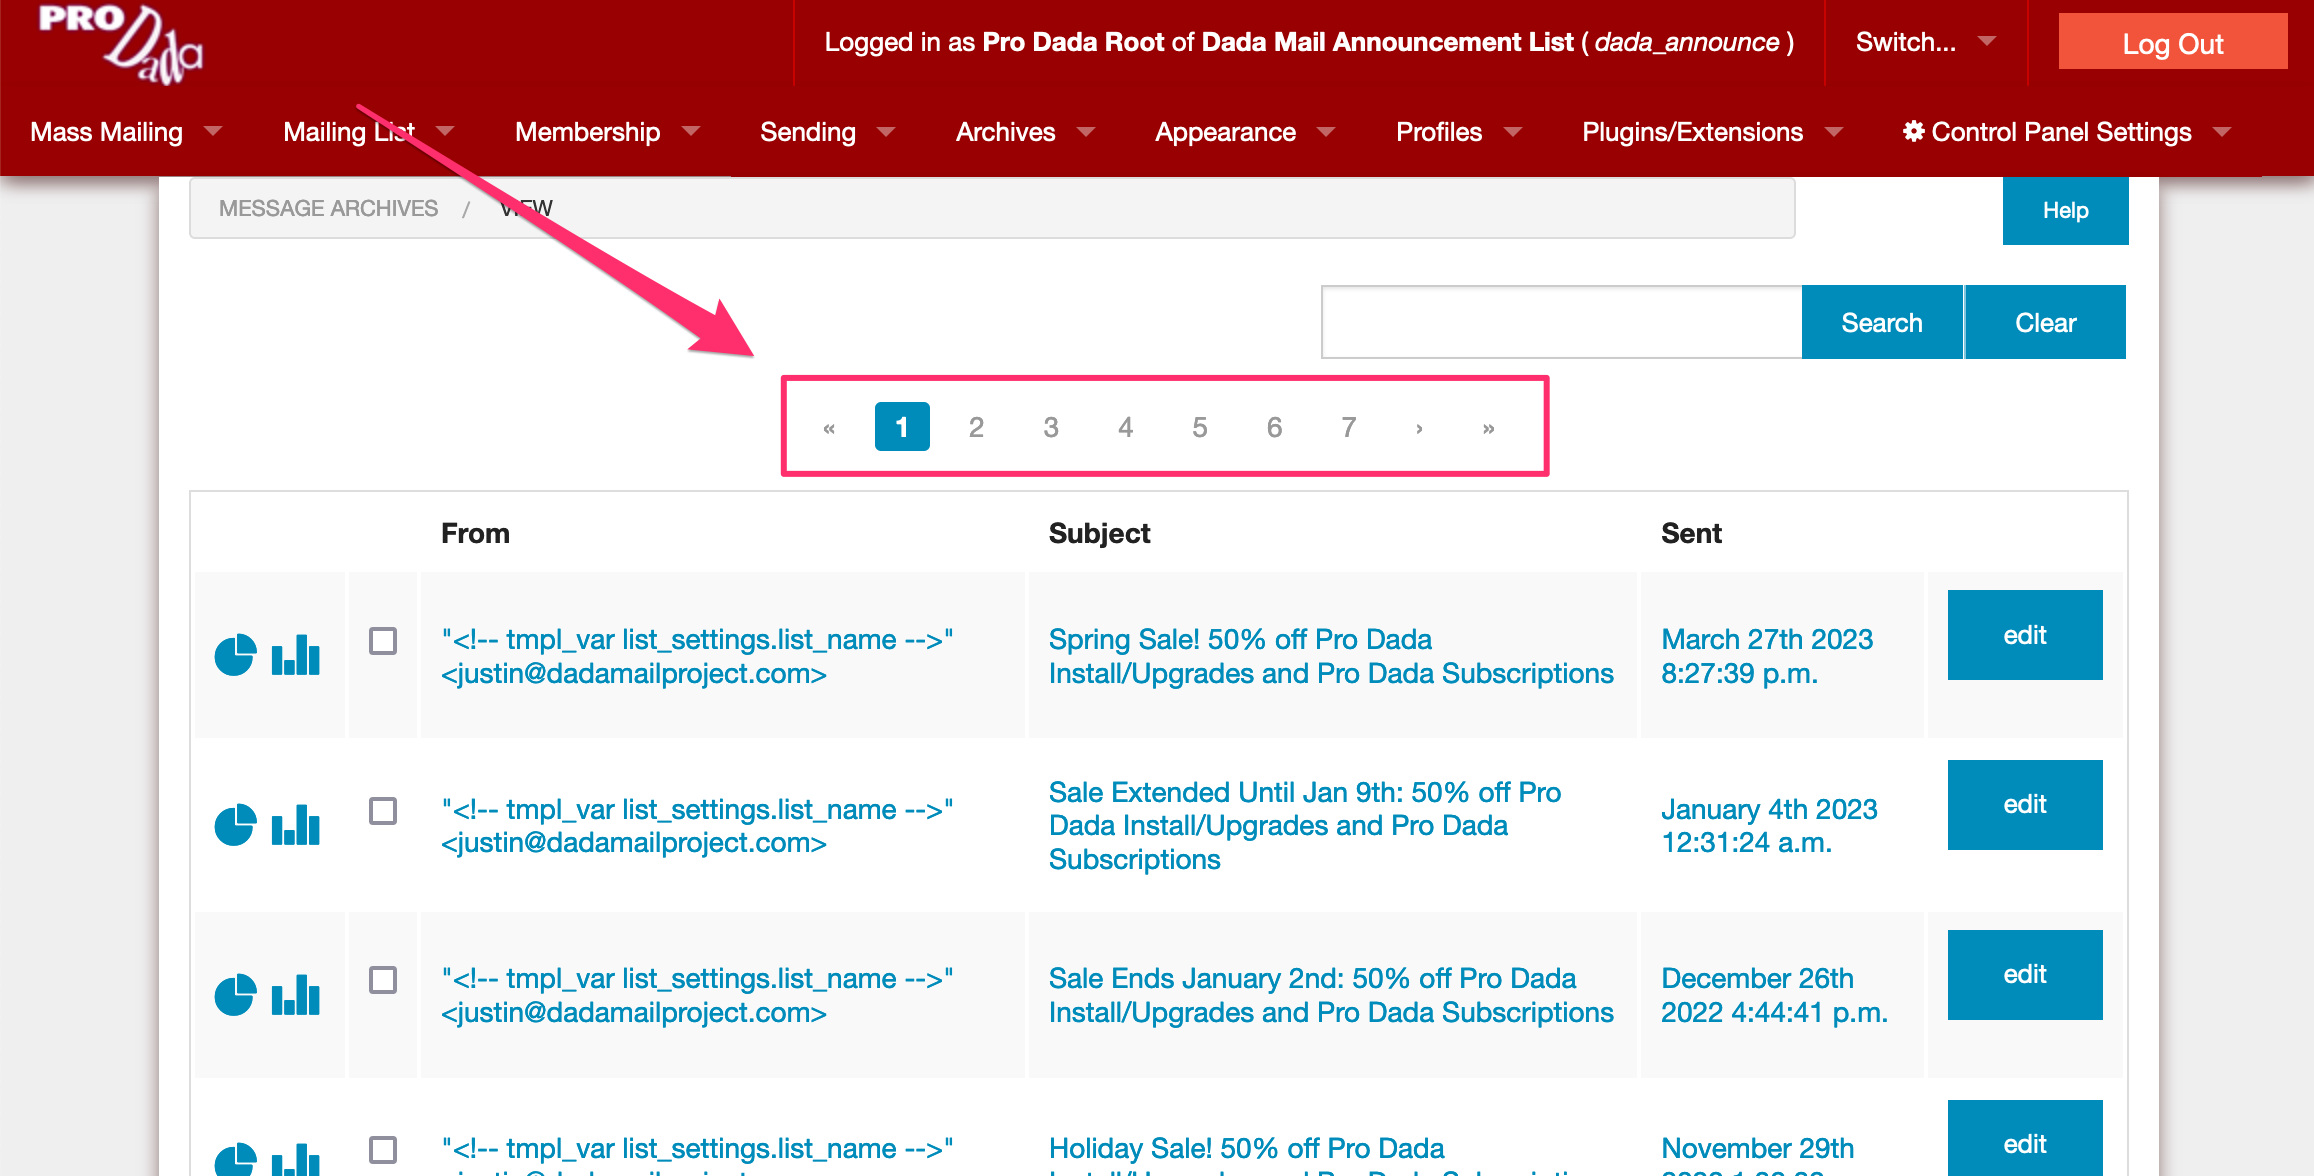 Pagination is also now present when looking at the archives in the list control panel